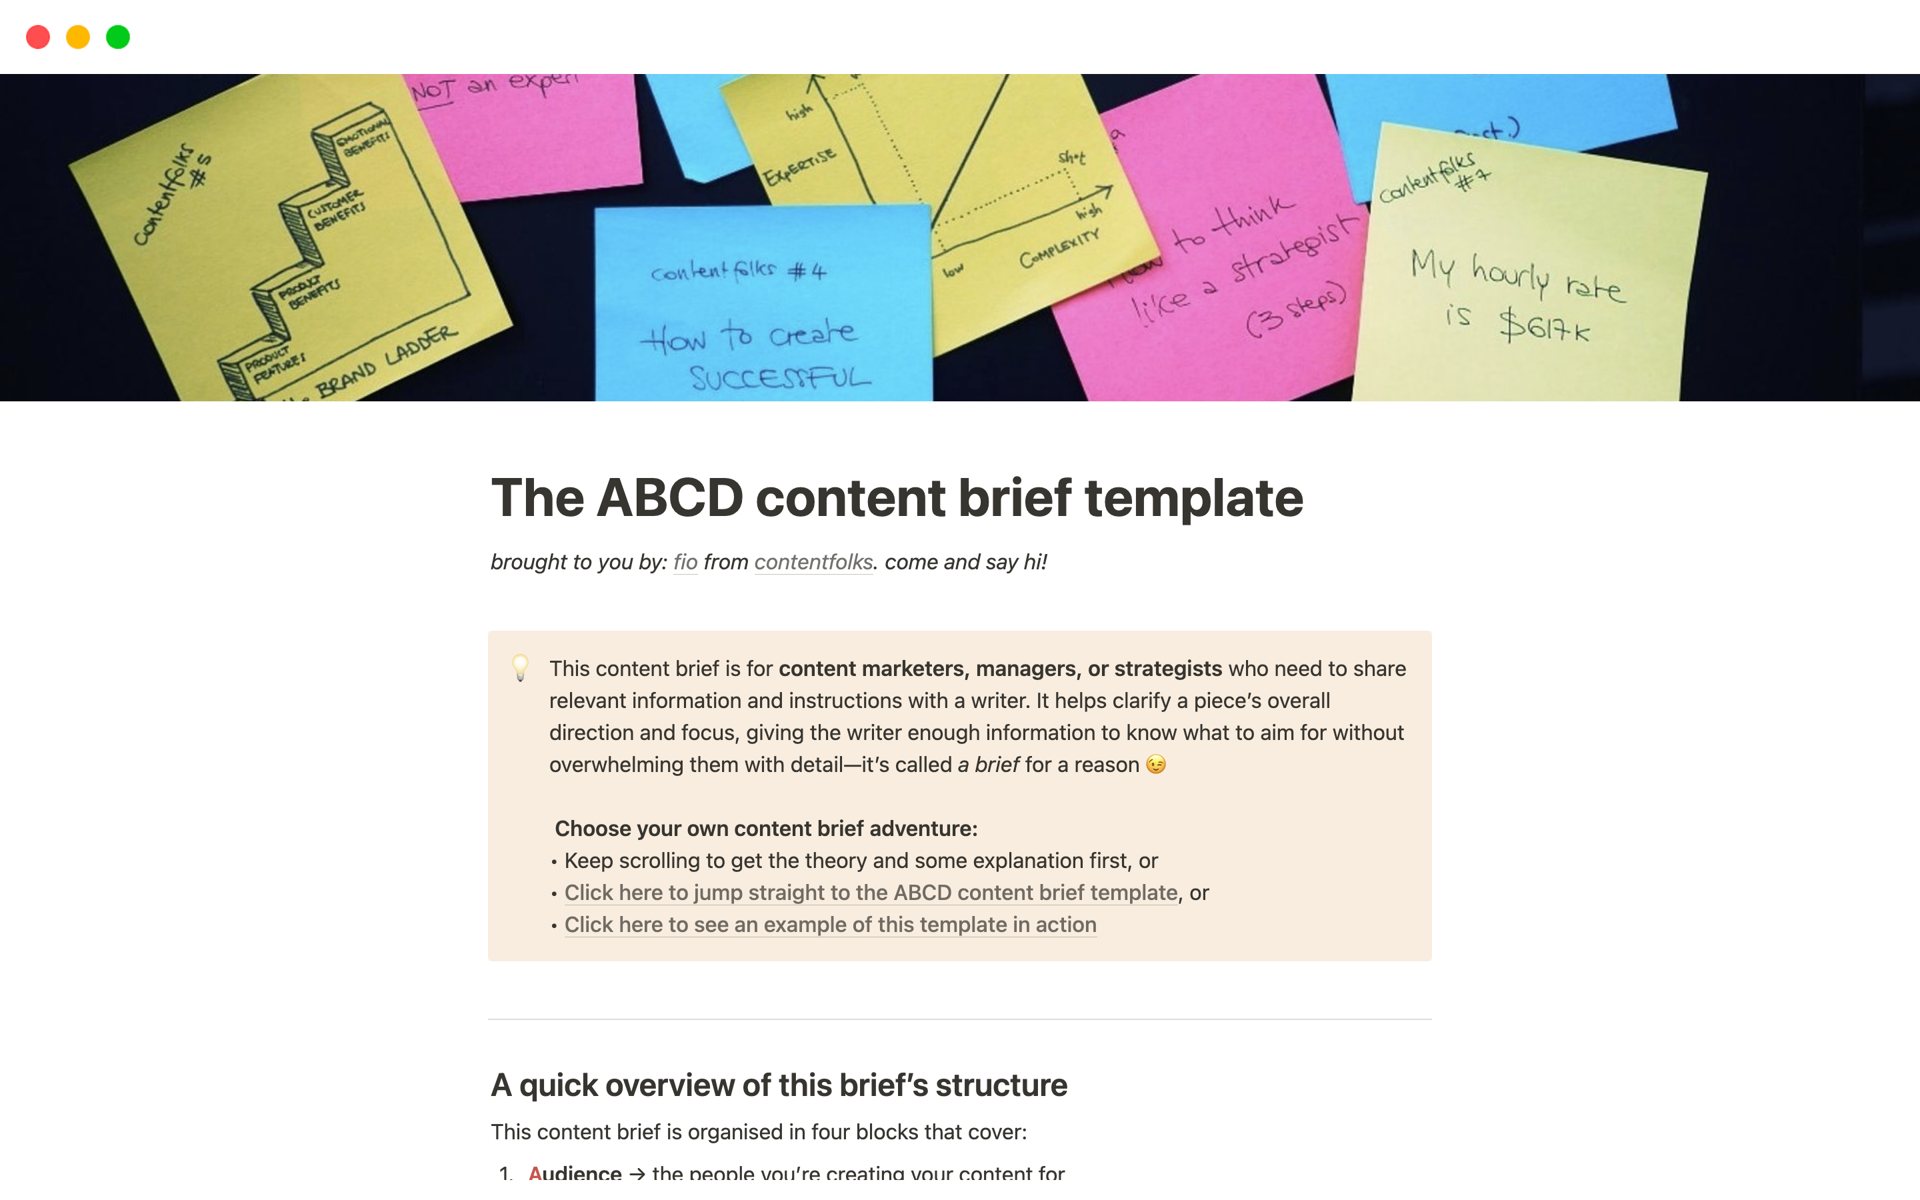 A content brief template for content marketers, managers, or strategists who need to share relevant information and instructions with a writer.